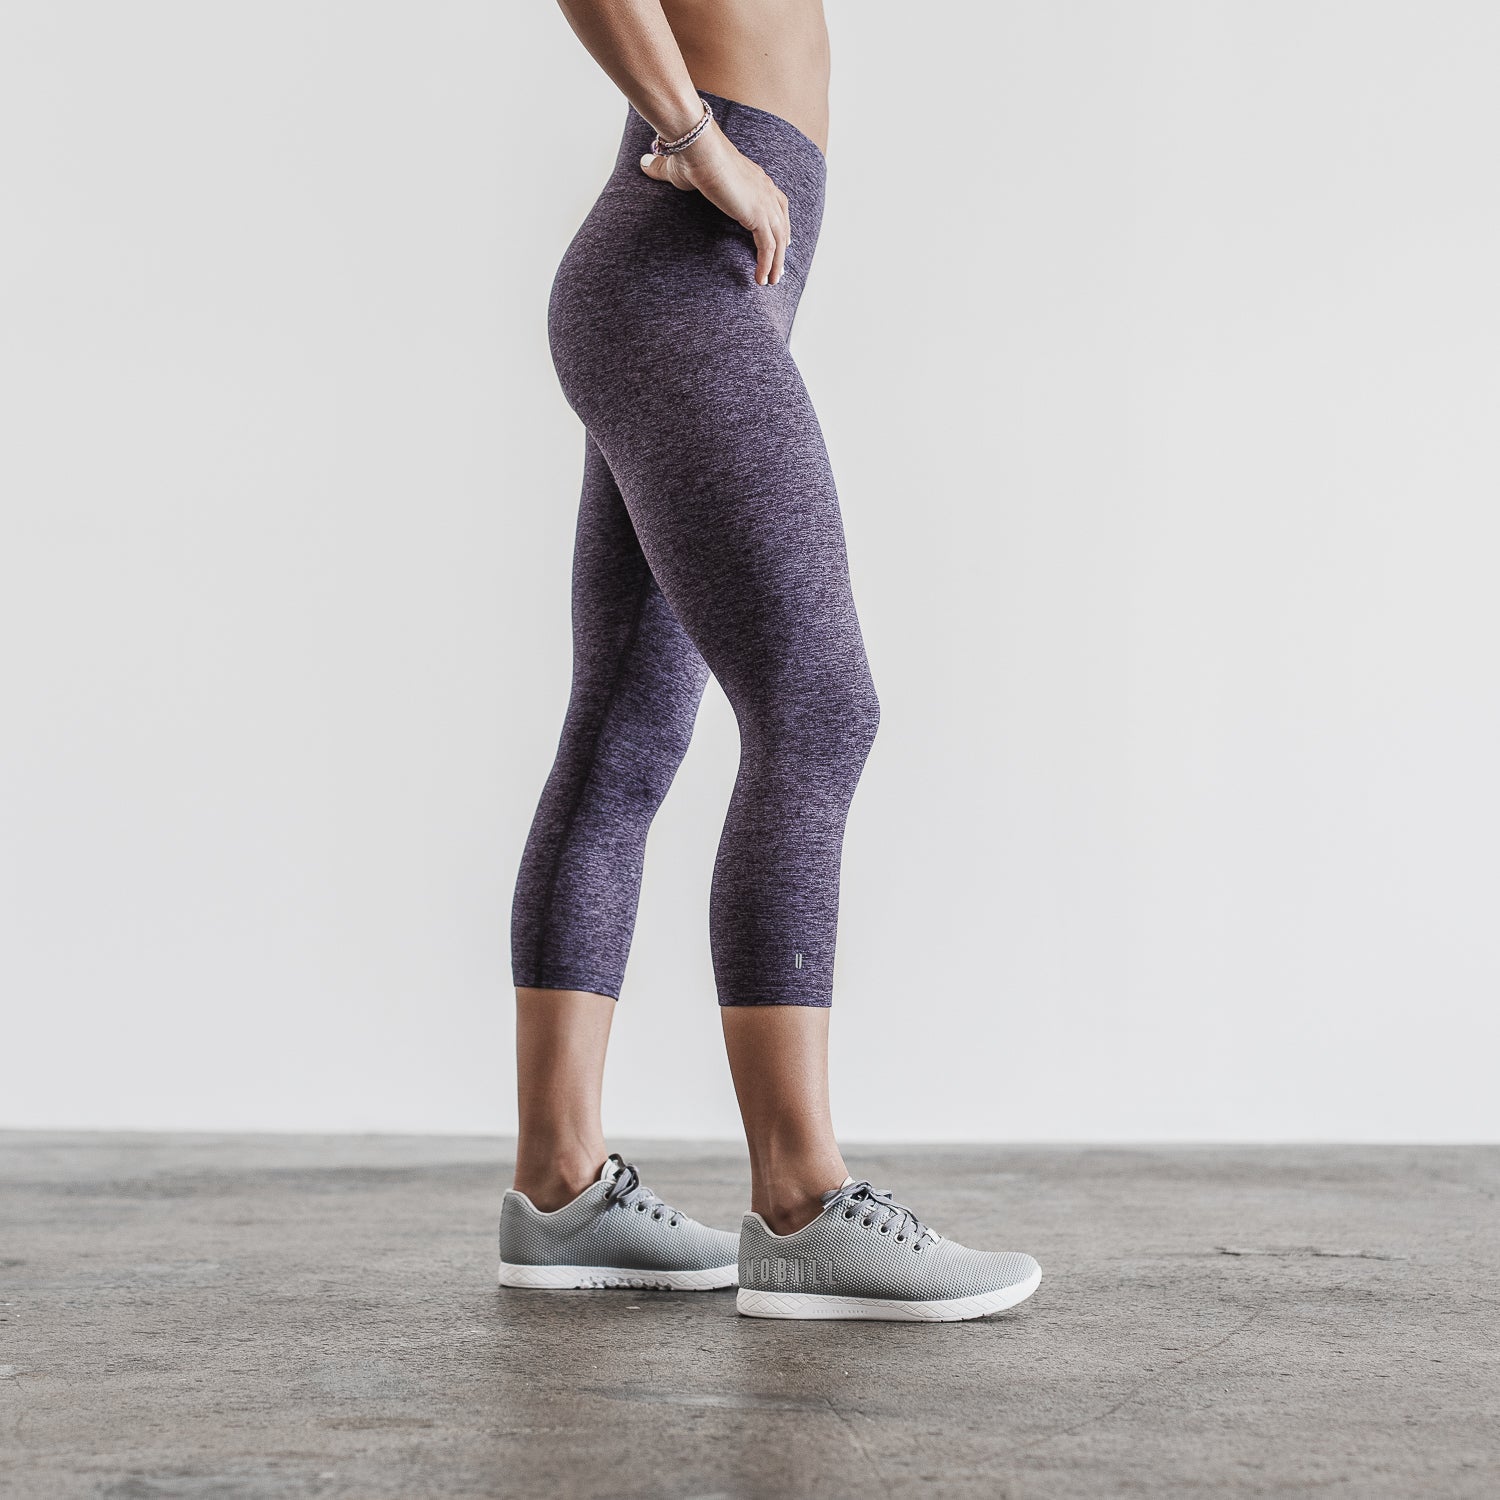 Women's High Rise Leggings - All in Motion Heathered Red Medium